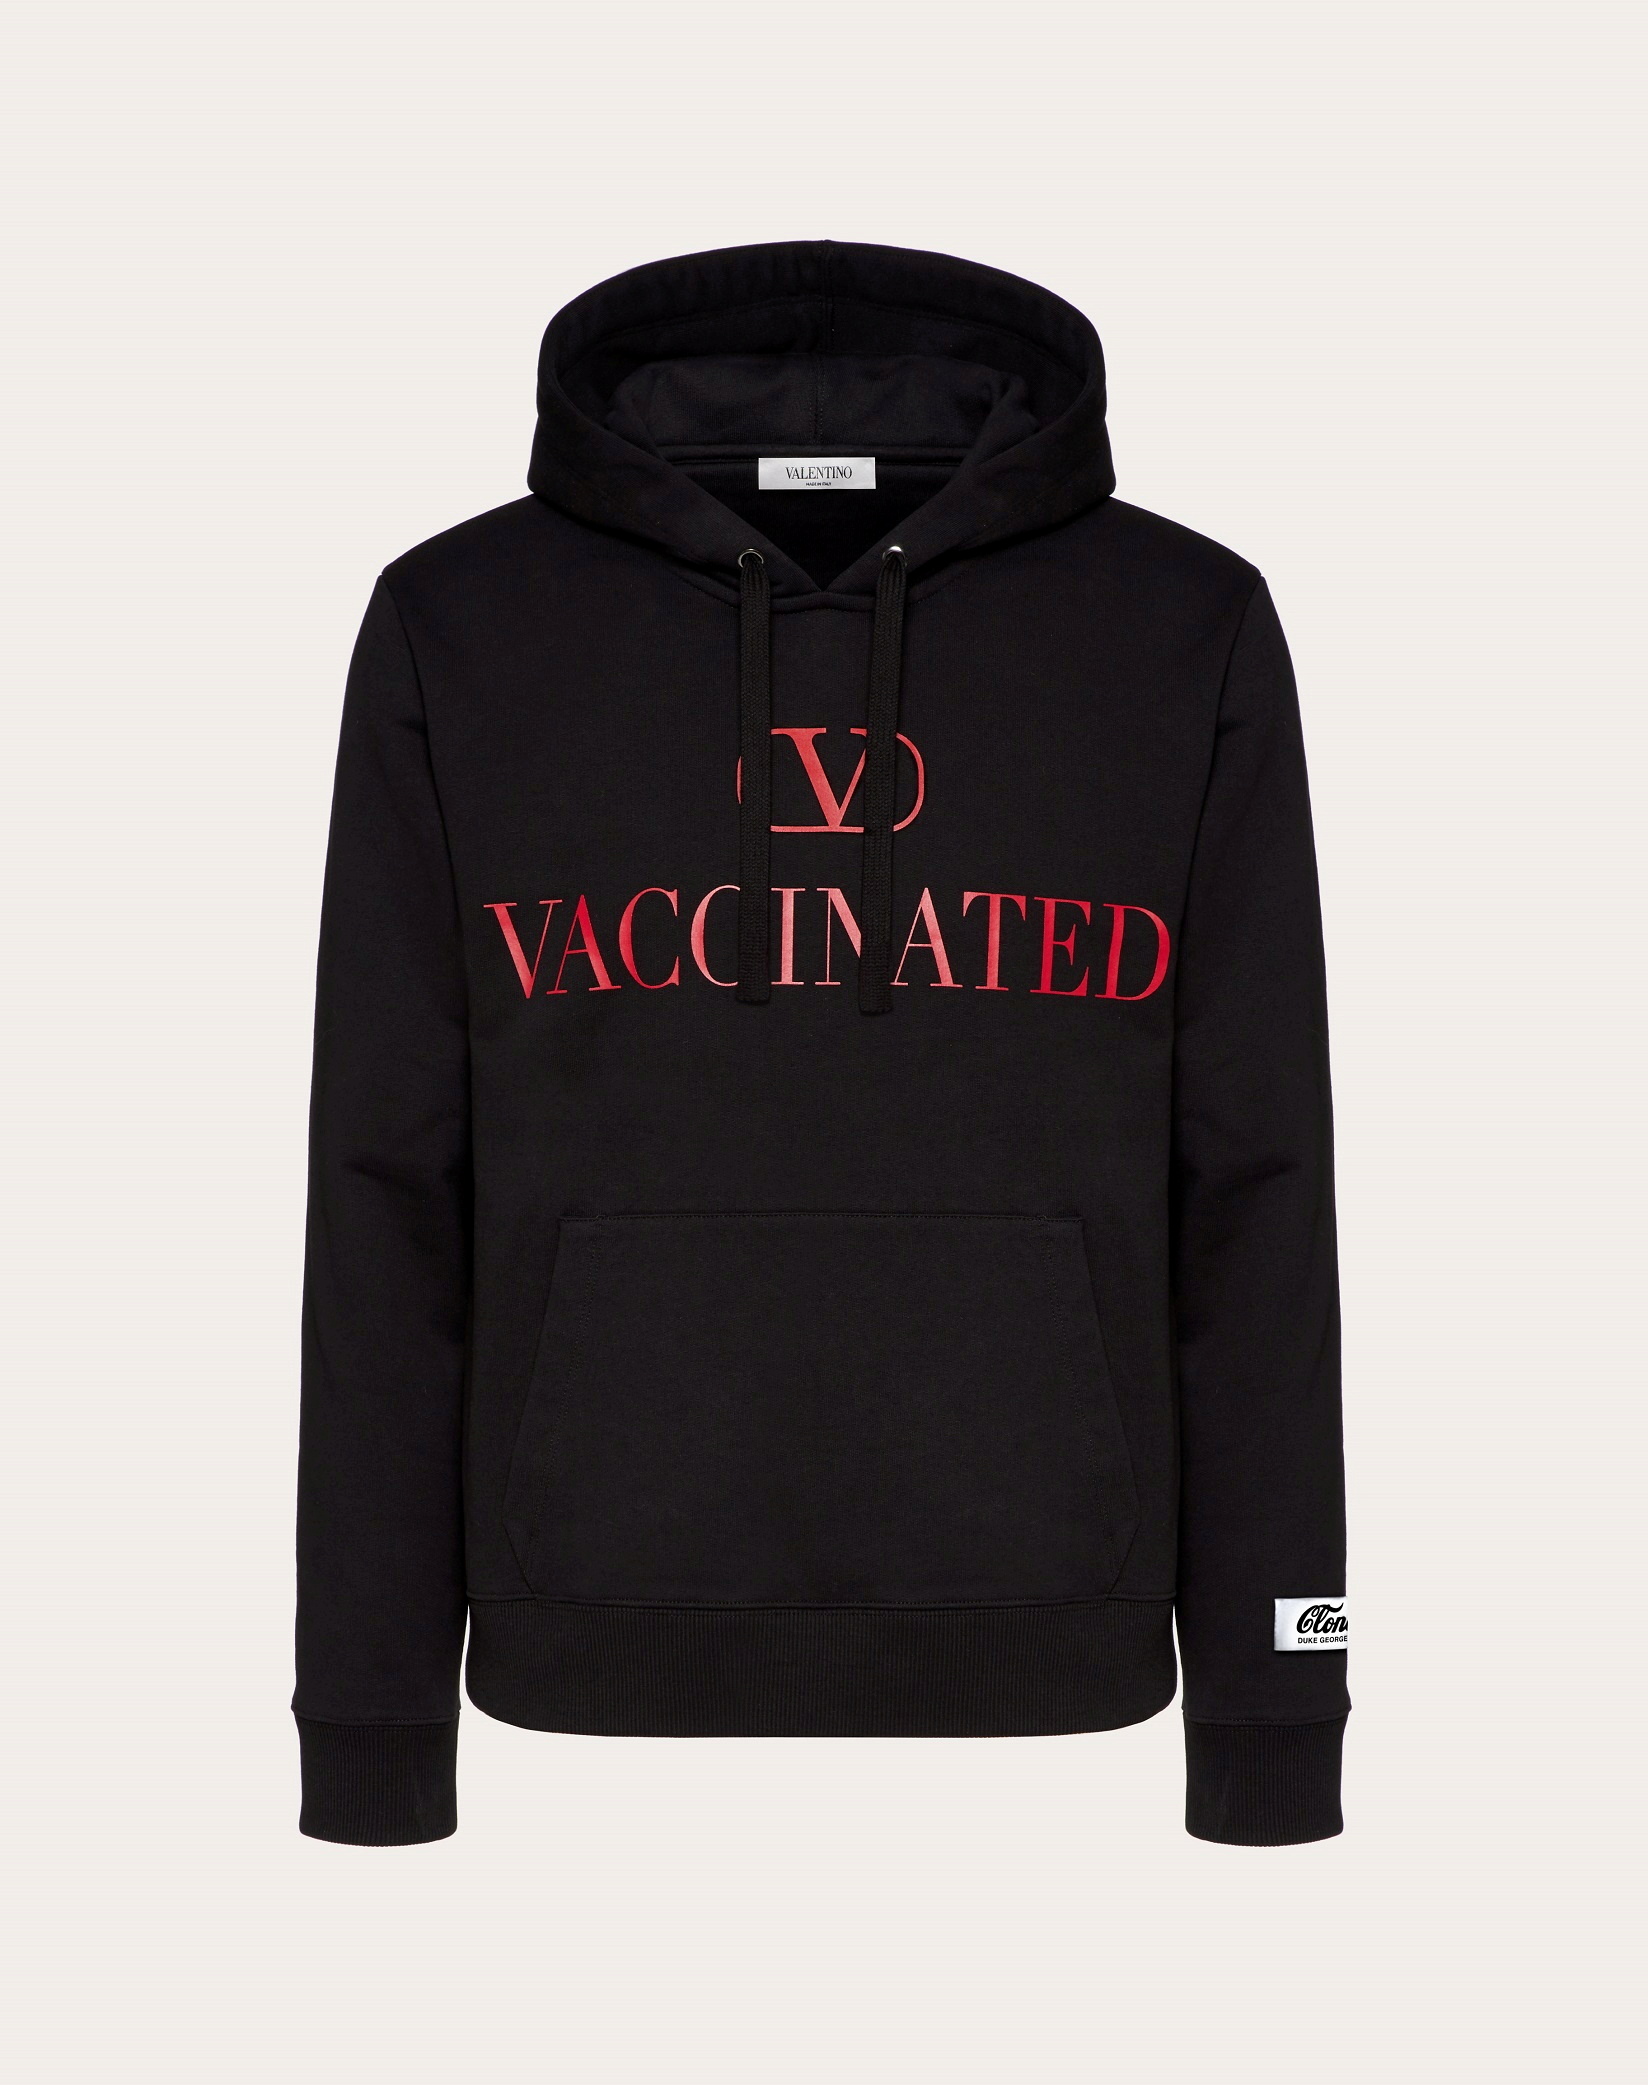 Fashion label Valentino to make pro-vaccine hoodie and donate proceeds to Unicef